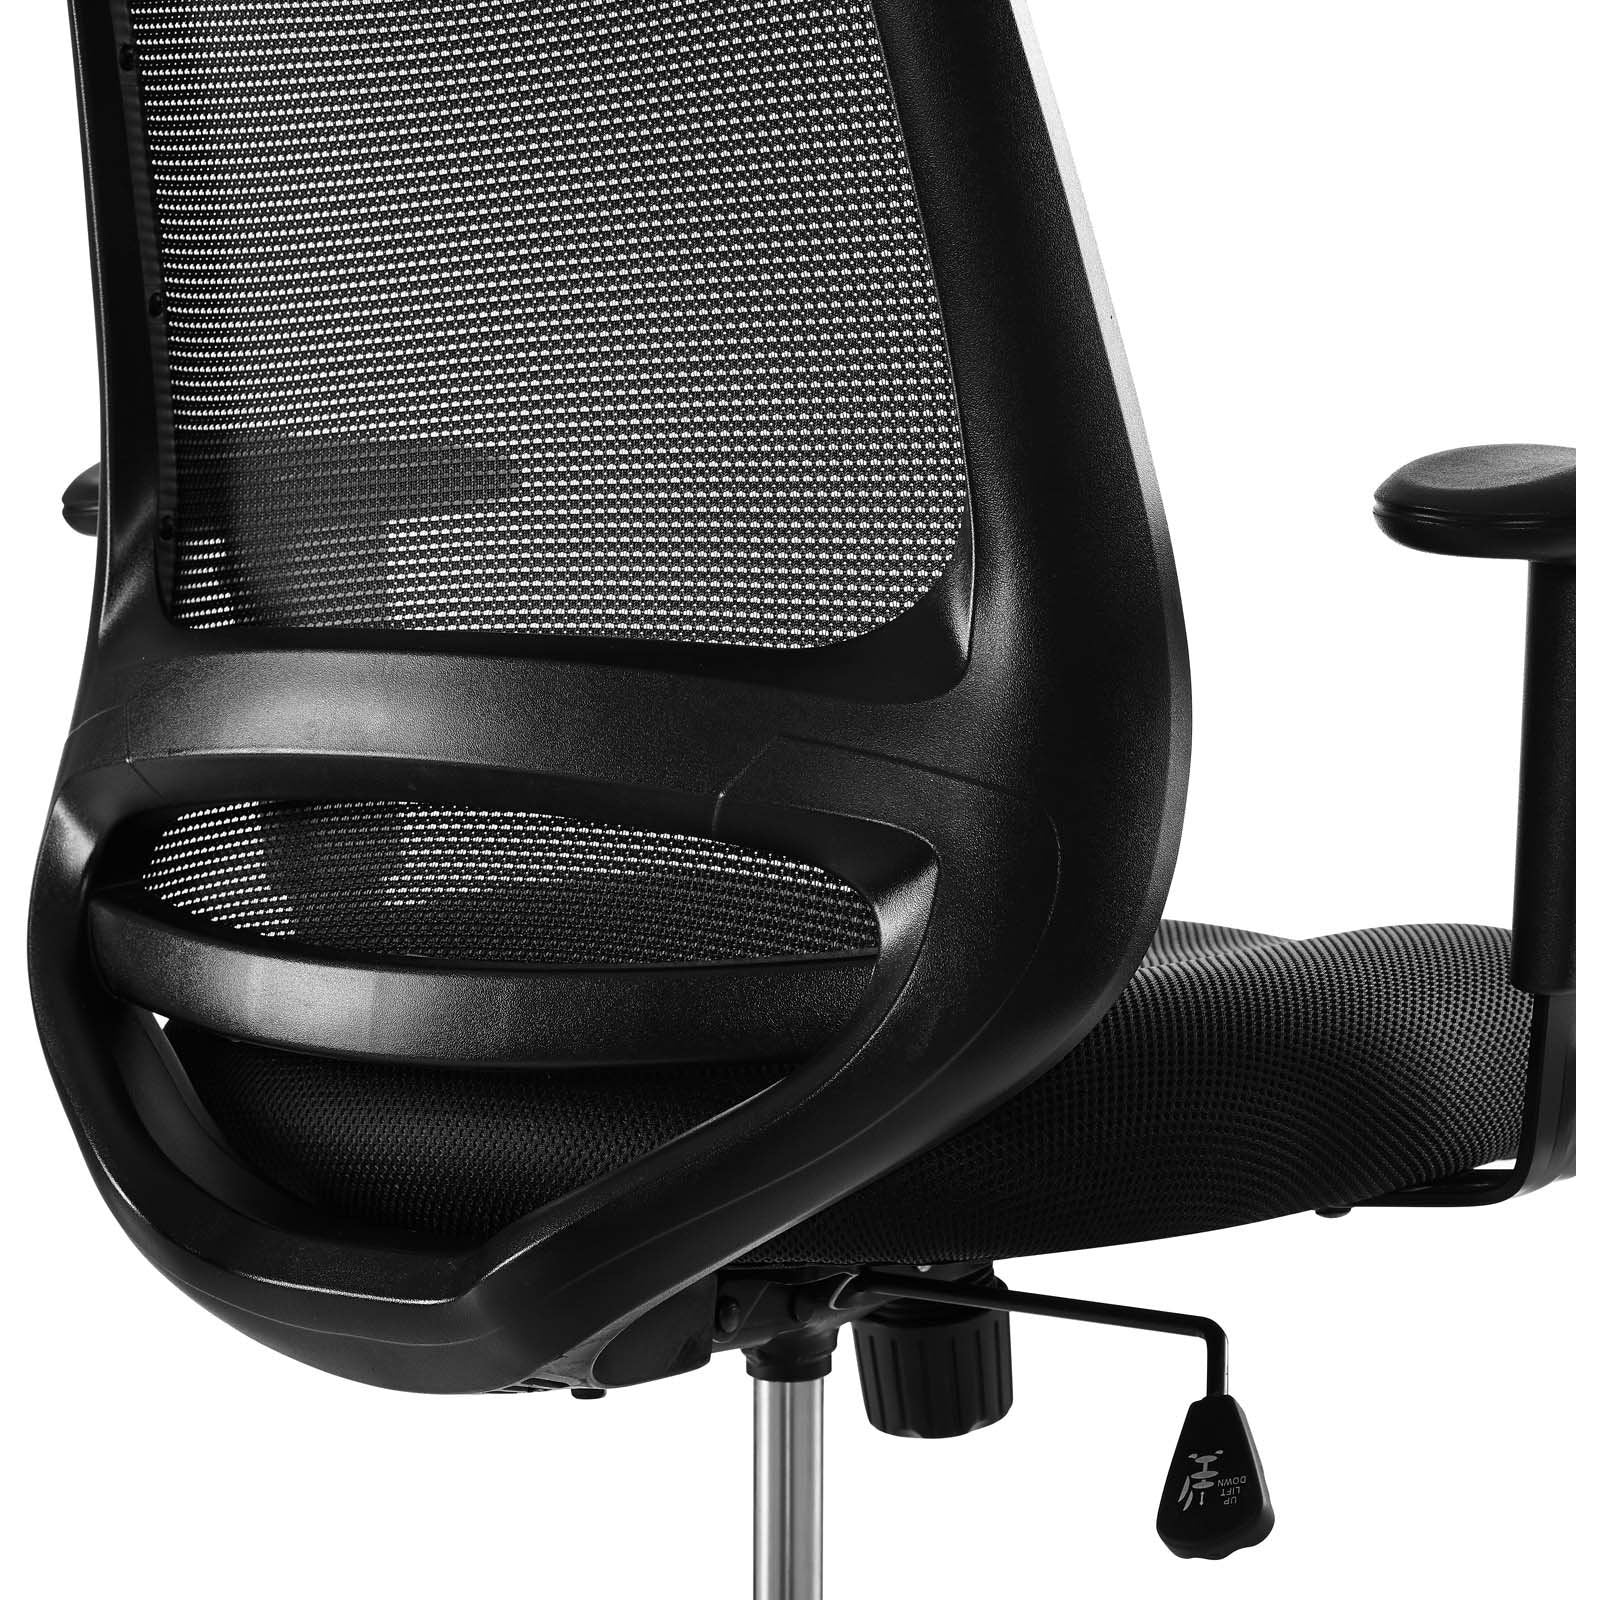 Modway Furniture Modern Forge Mesh Drafting Chair - EEI-3196